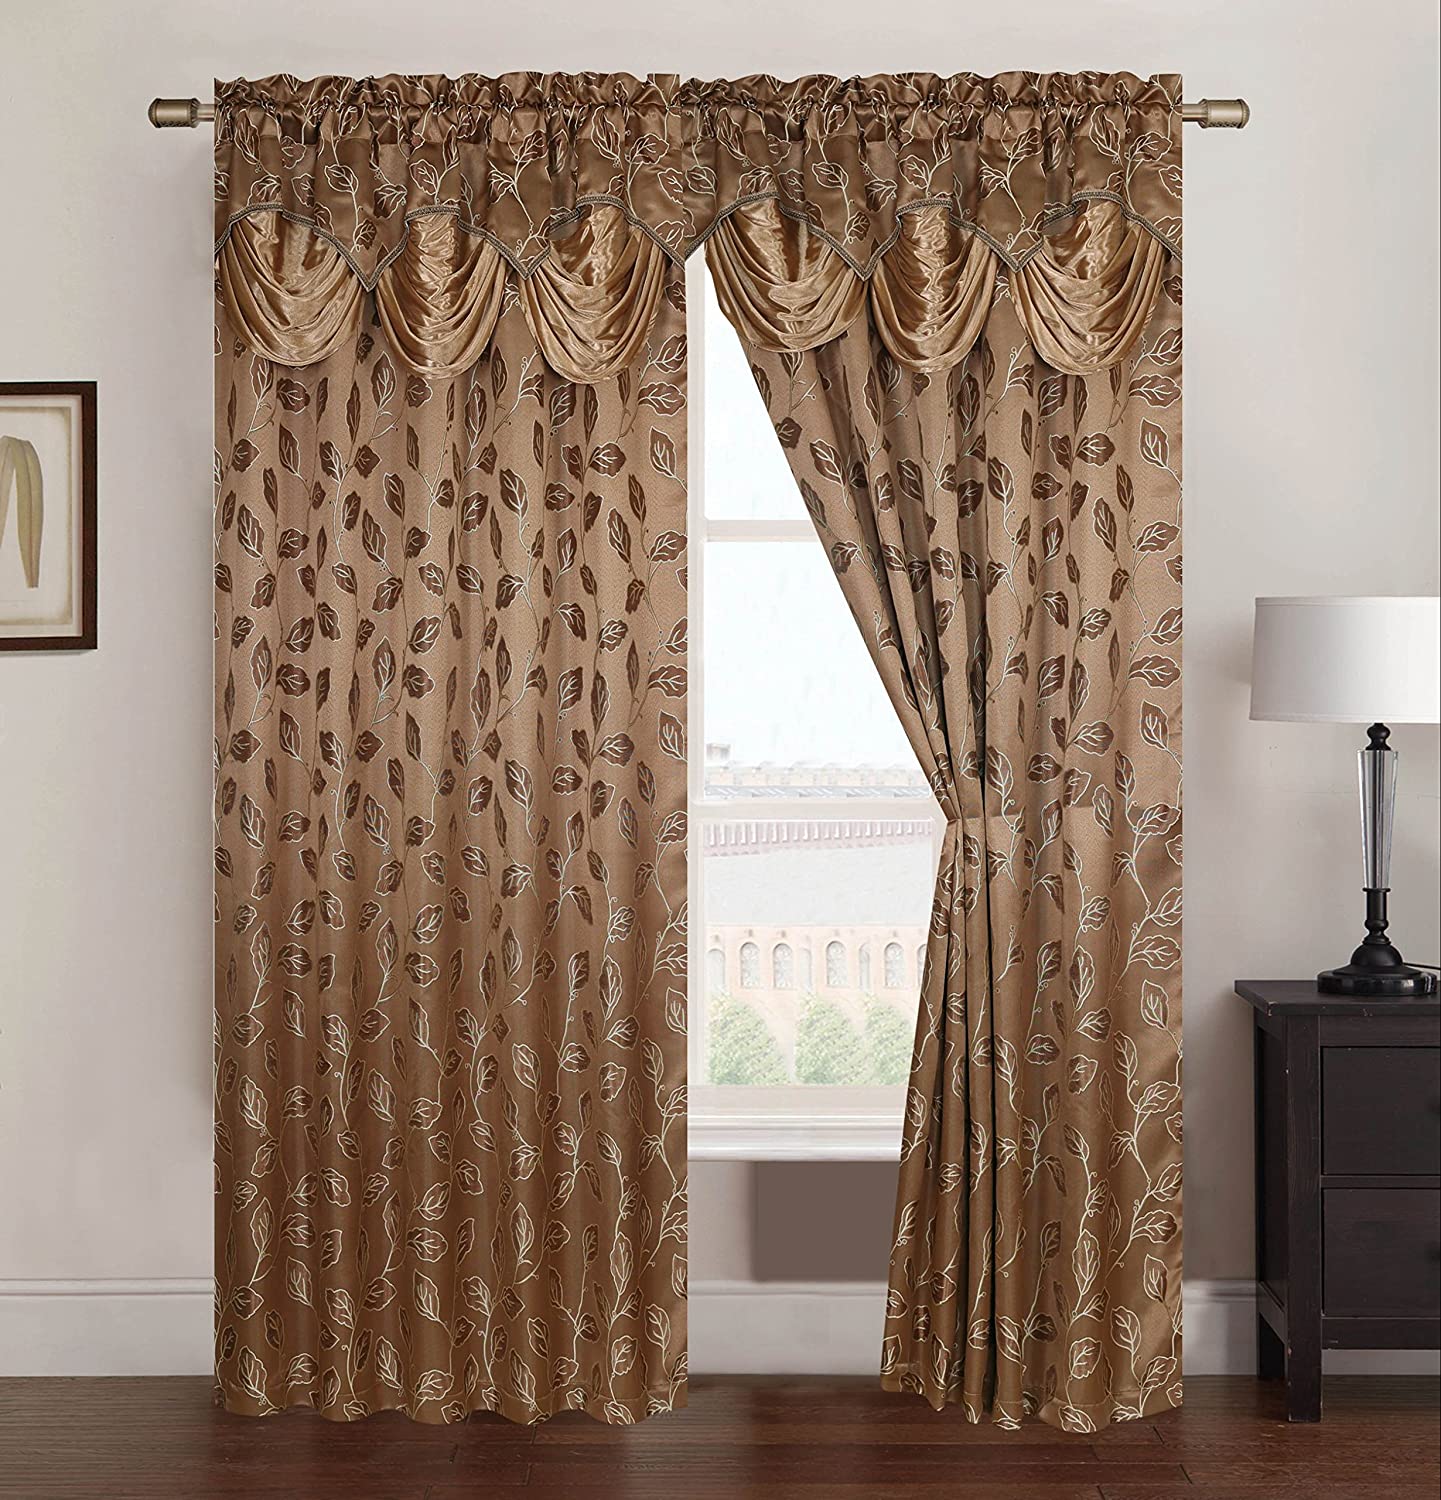 Brenda Jacquard 54 x 84 in. Rod Pocket Curtain Panel w/ Attached 18 in. Valance - Linen Universe Co.